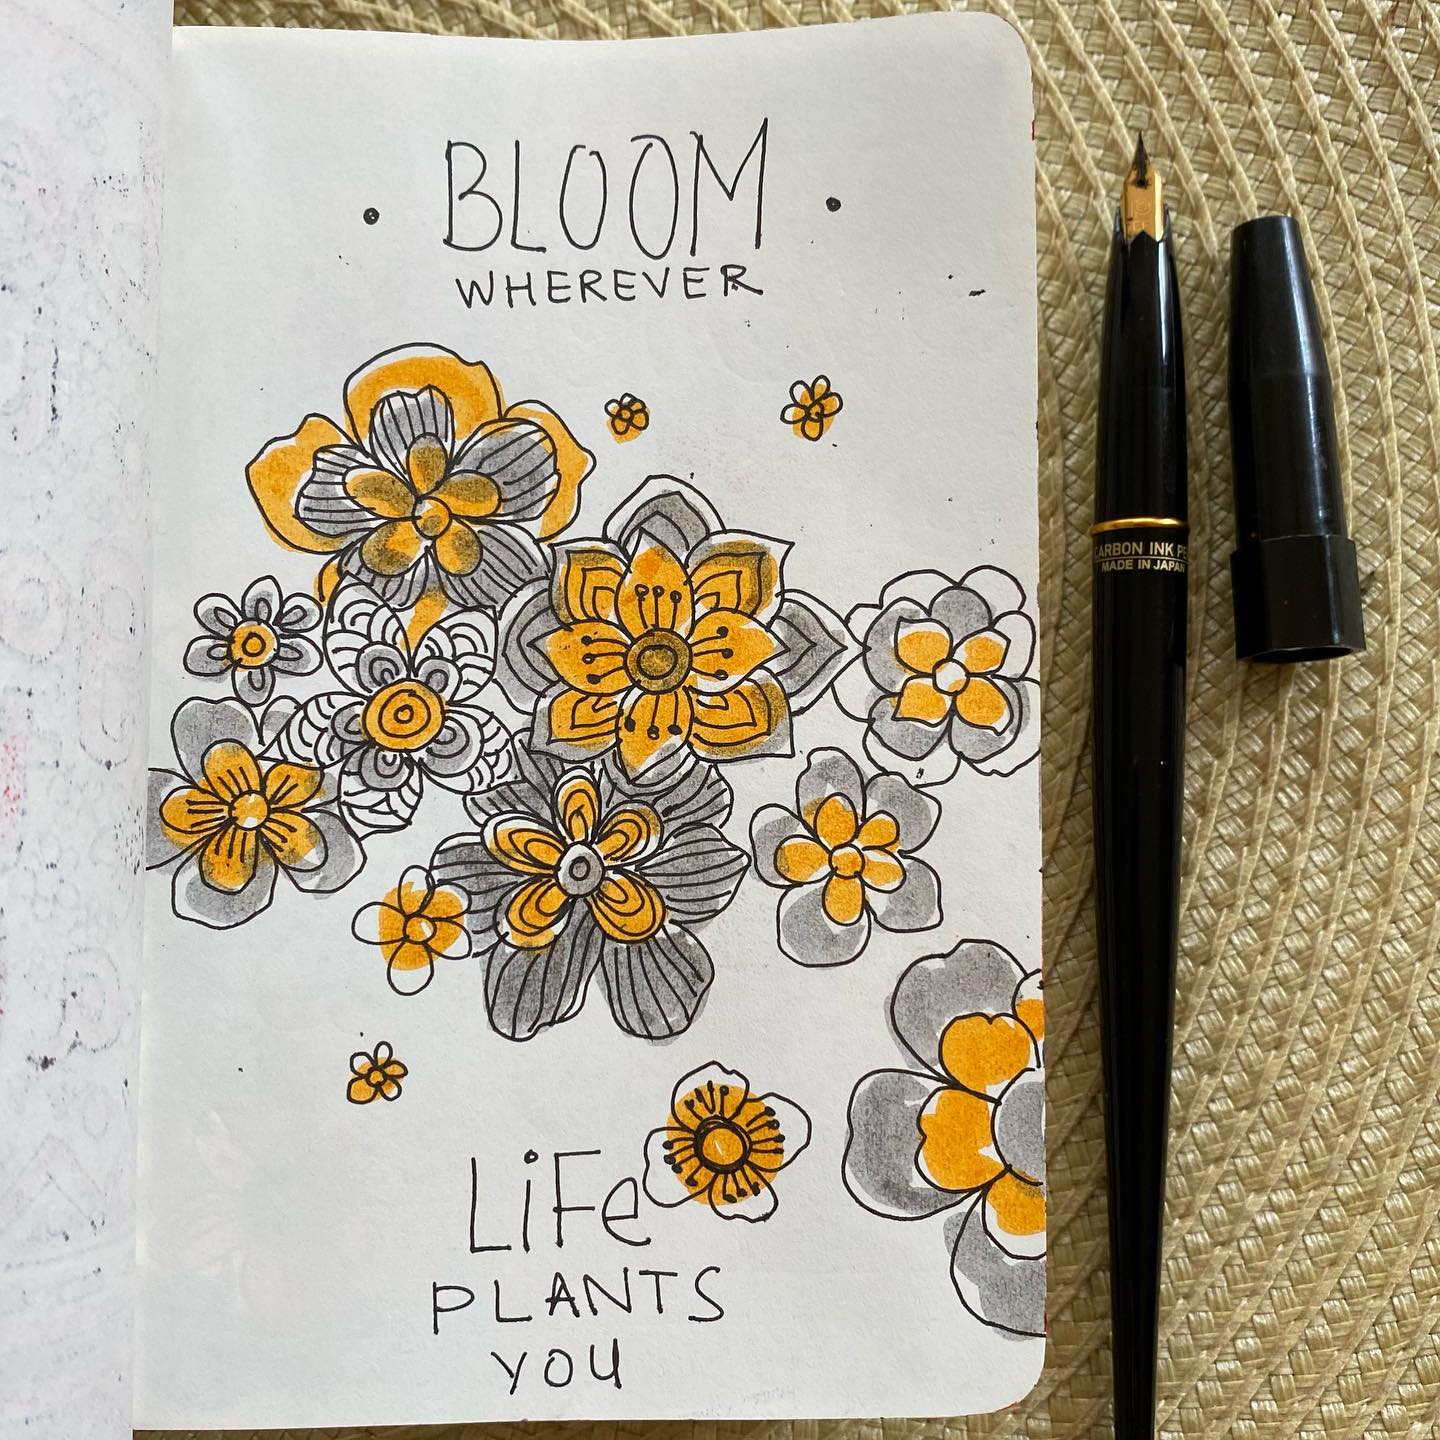 Our environment often shapes us. It either brings out the best in us or the worst and sometimes in between. 

It’s never a surety what the world will offer. However, we can offer what we’ve got, for sure!

In the process, we might change the world or at least some part of it and help shape it instead.

Bloom